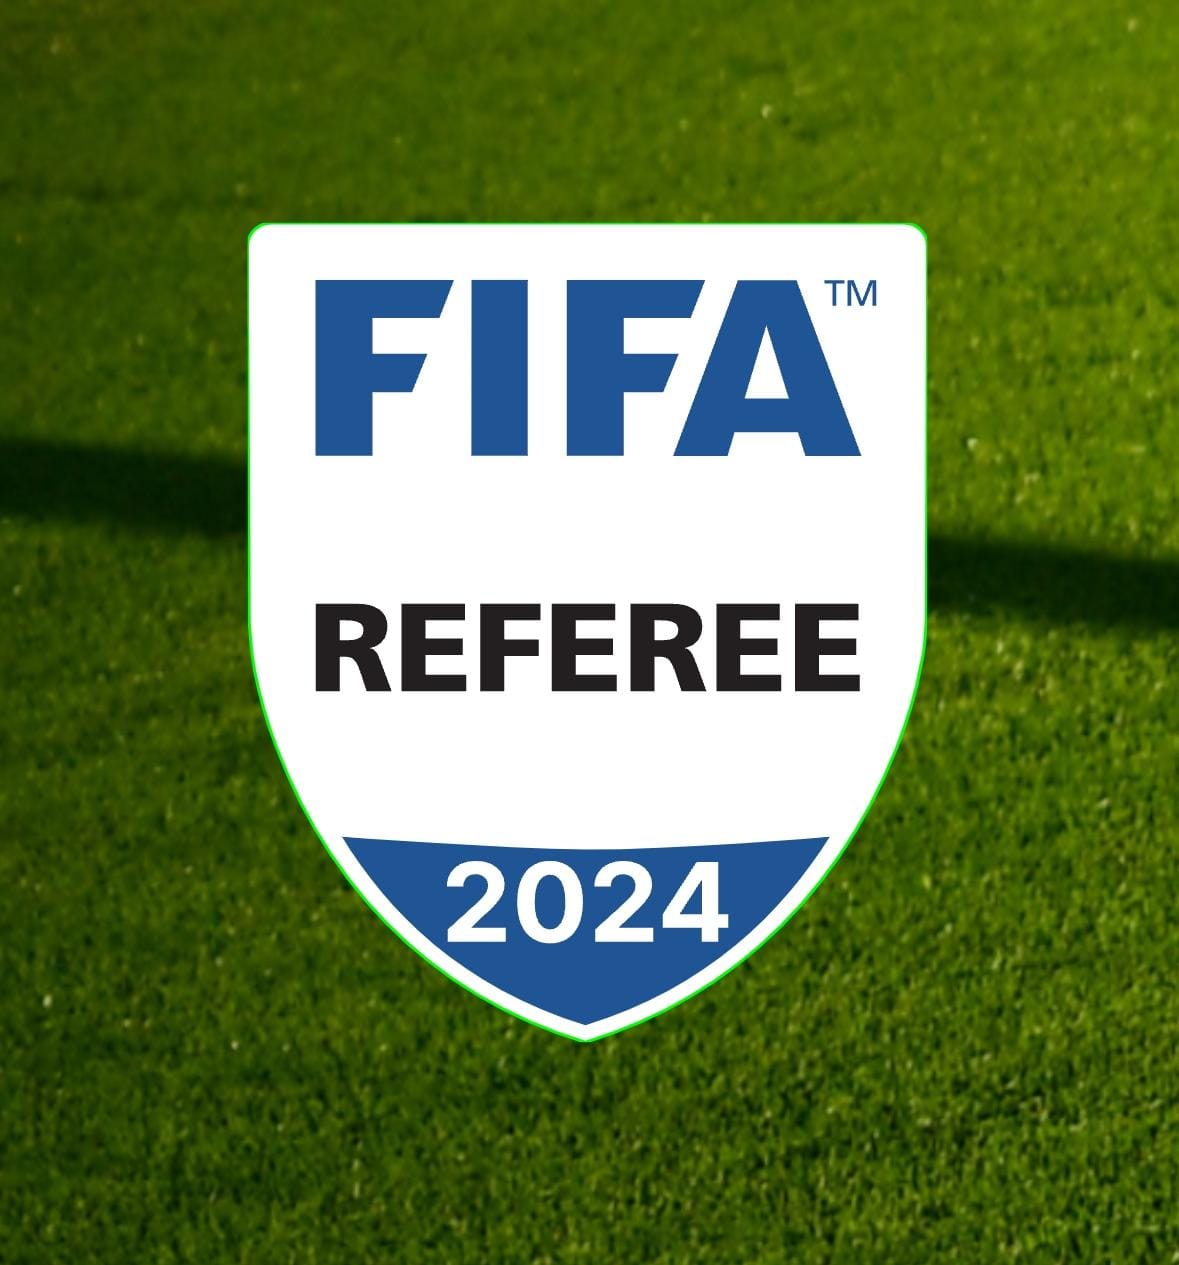 Twenty two referees to receive FIFA badges for 2024